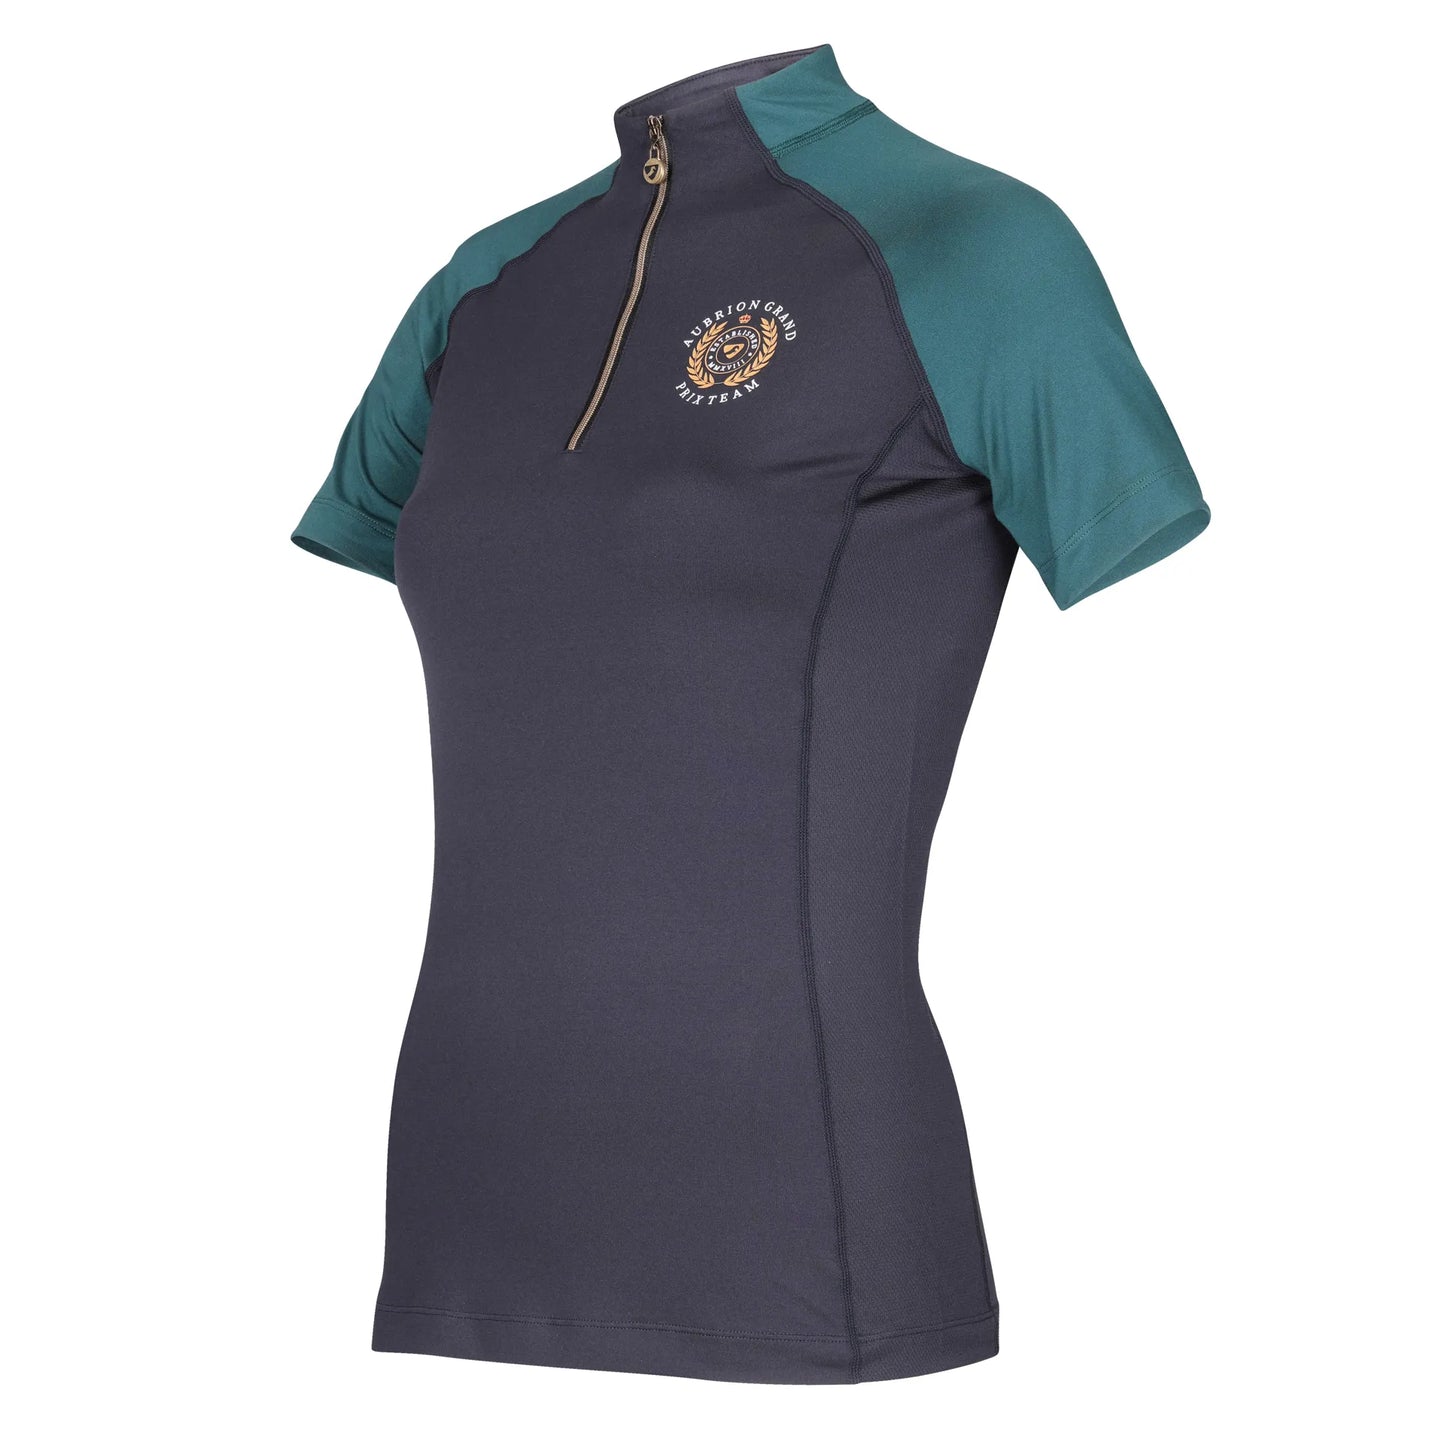 Shires Aubrion Team Short Sleeve Young Rider Base Layer - Black